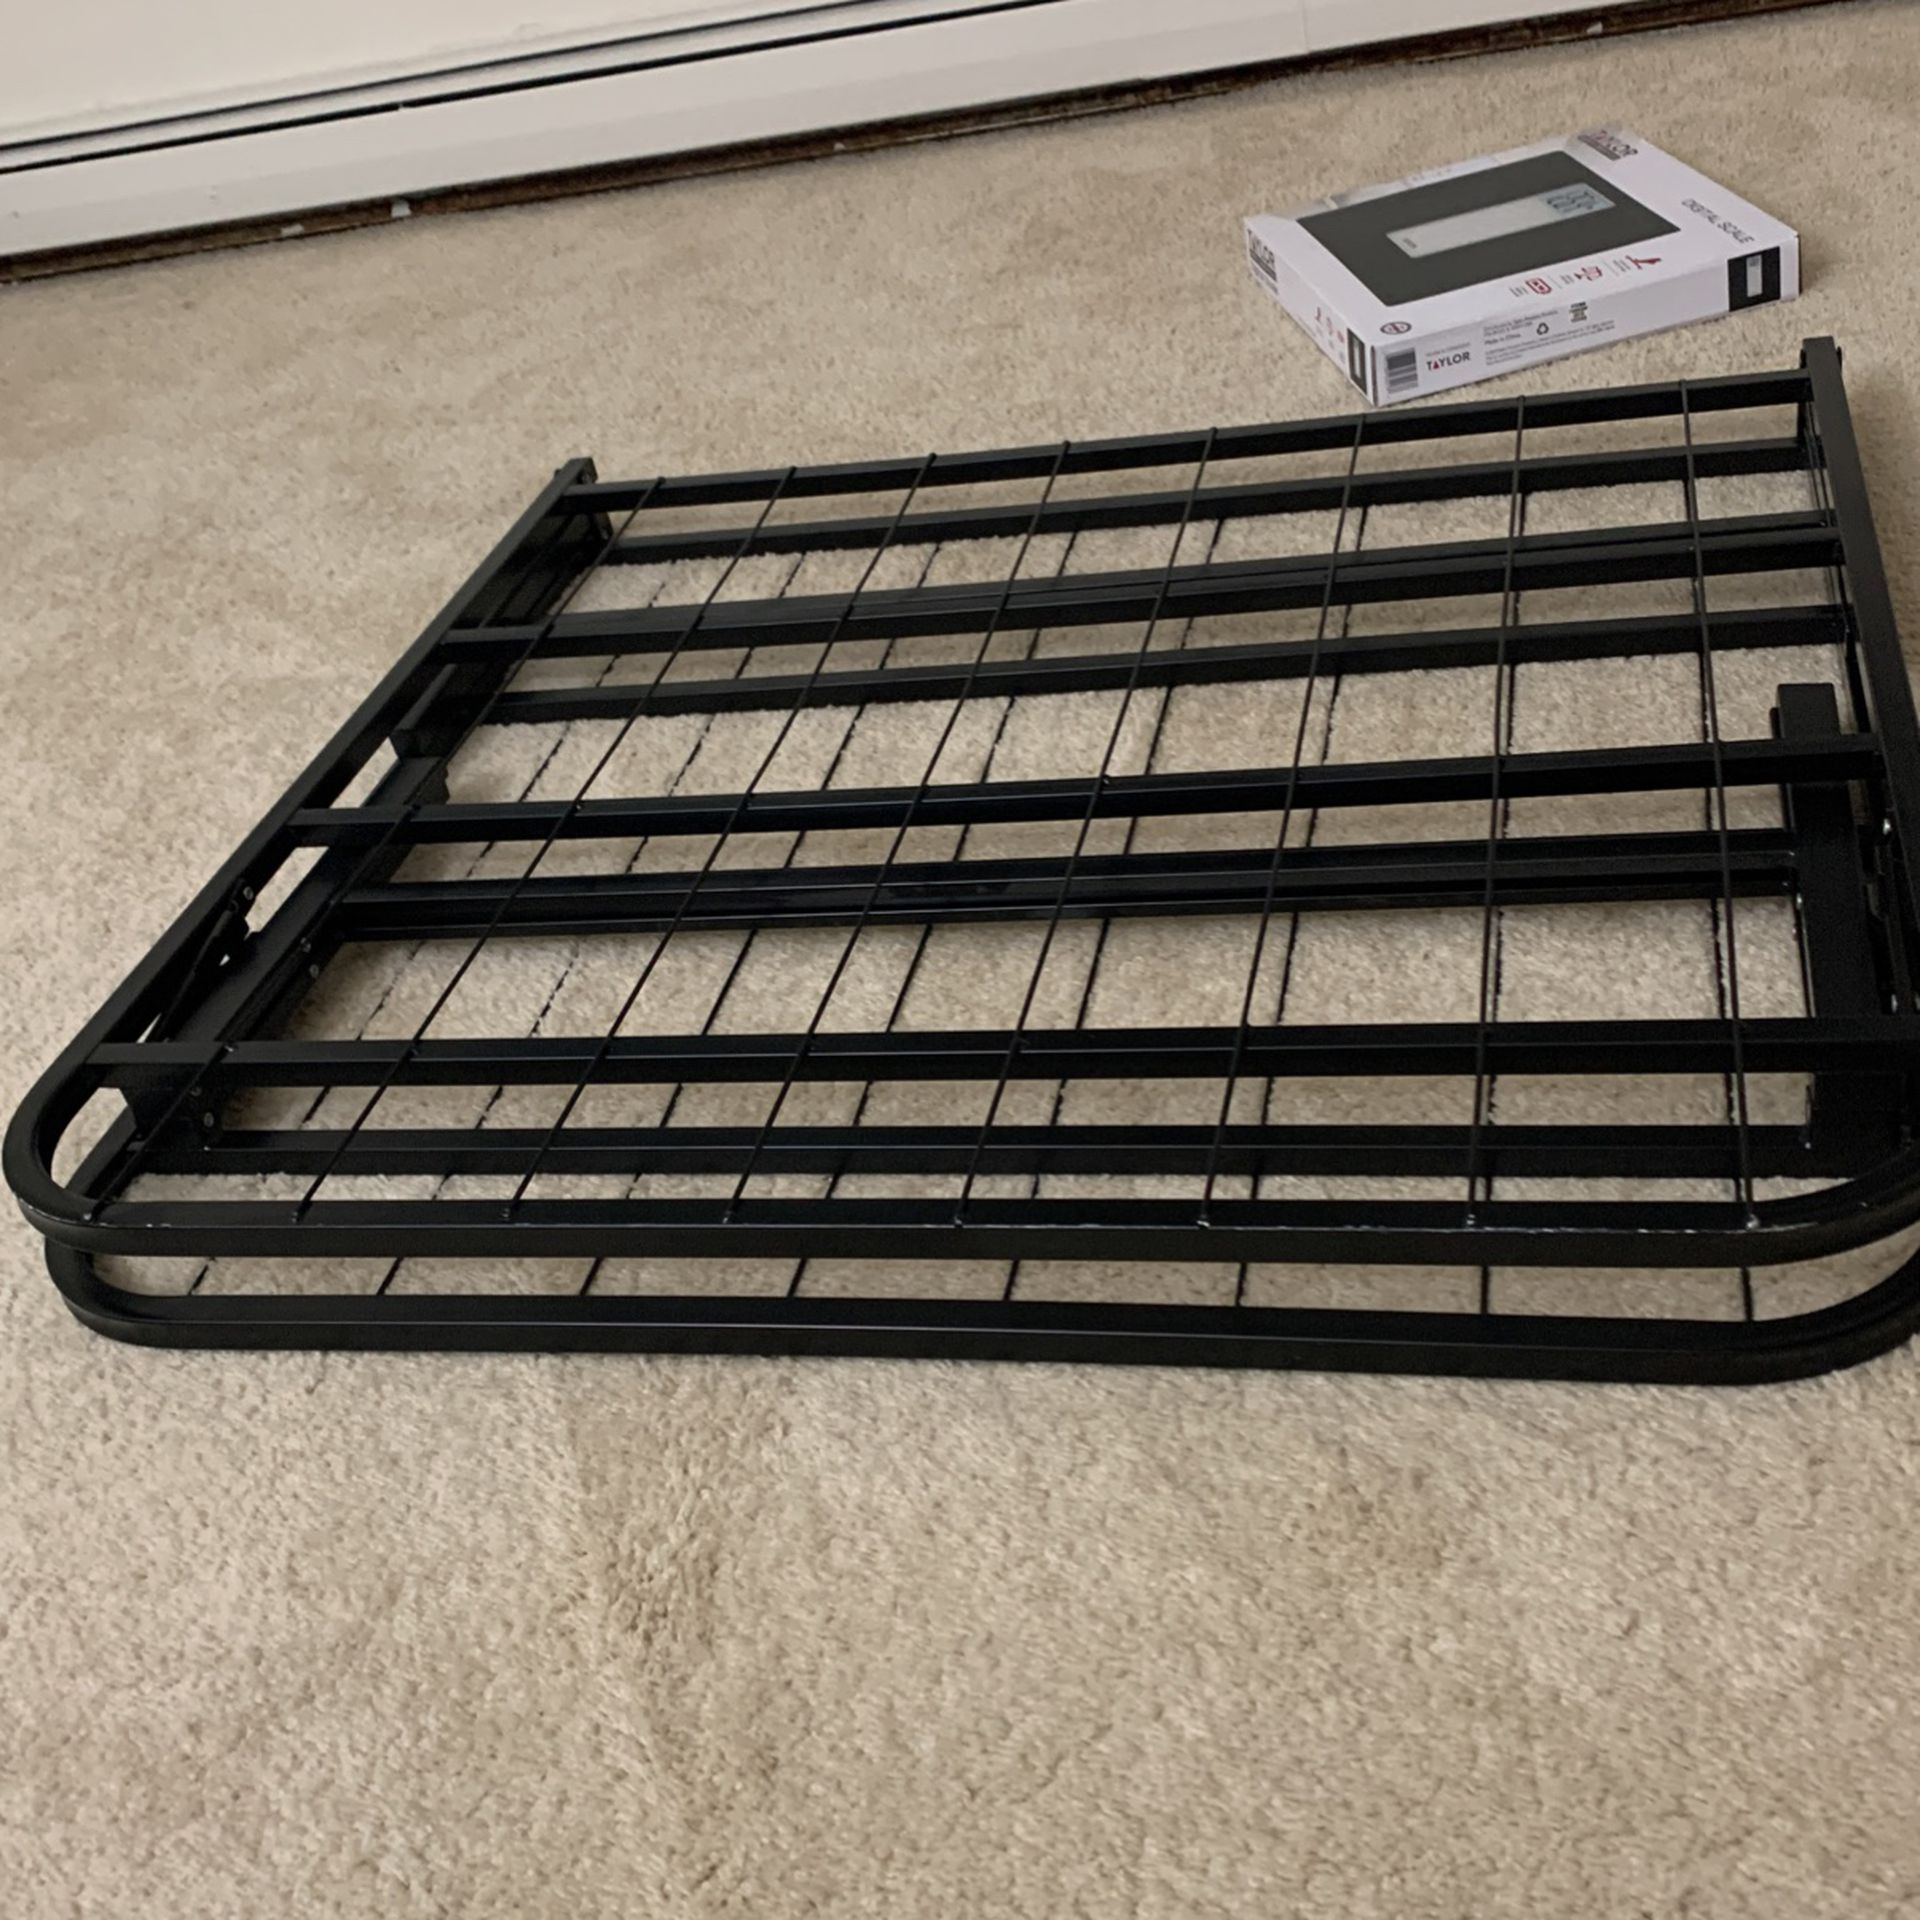 Twin Bed Frame For Sale 